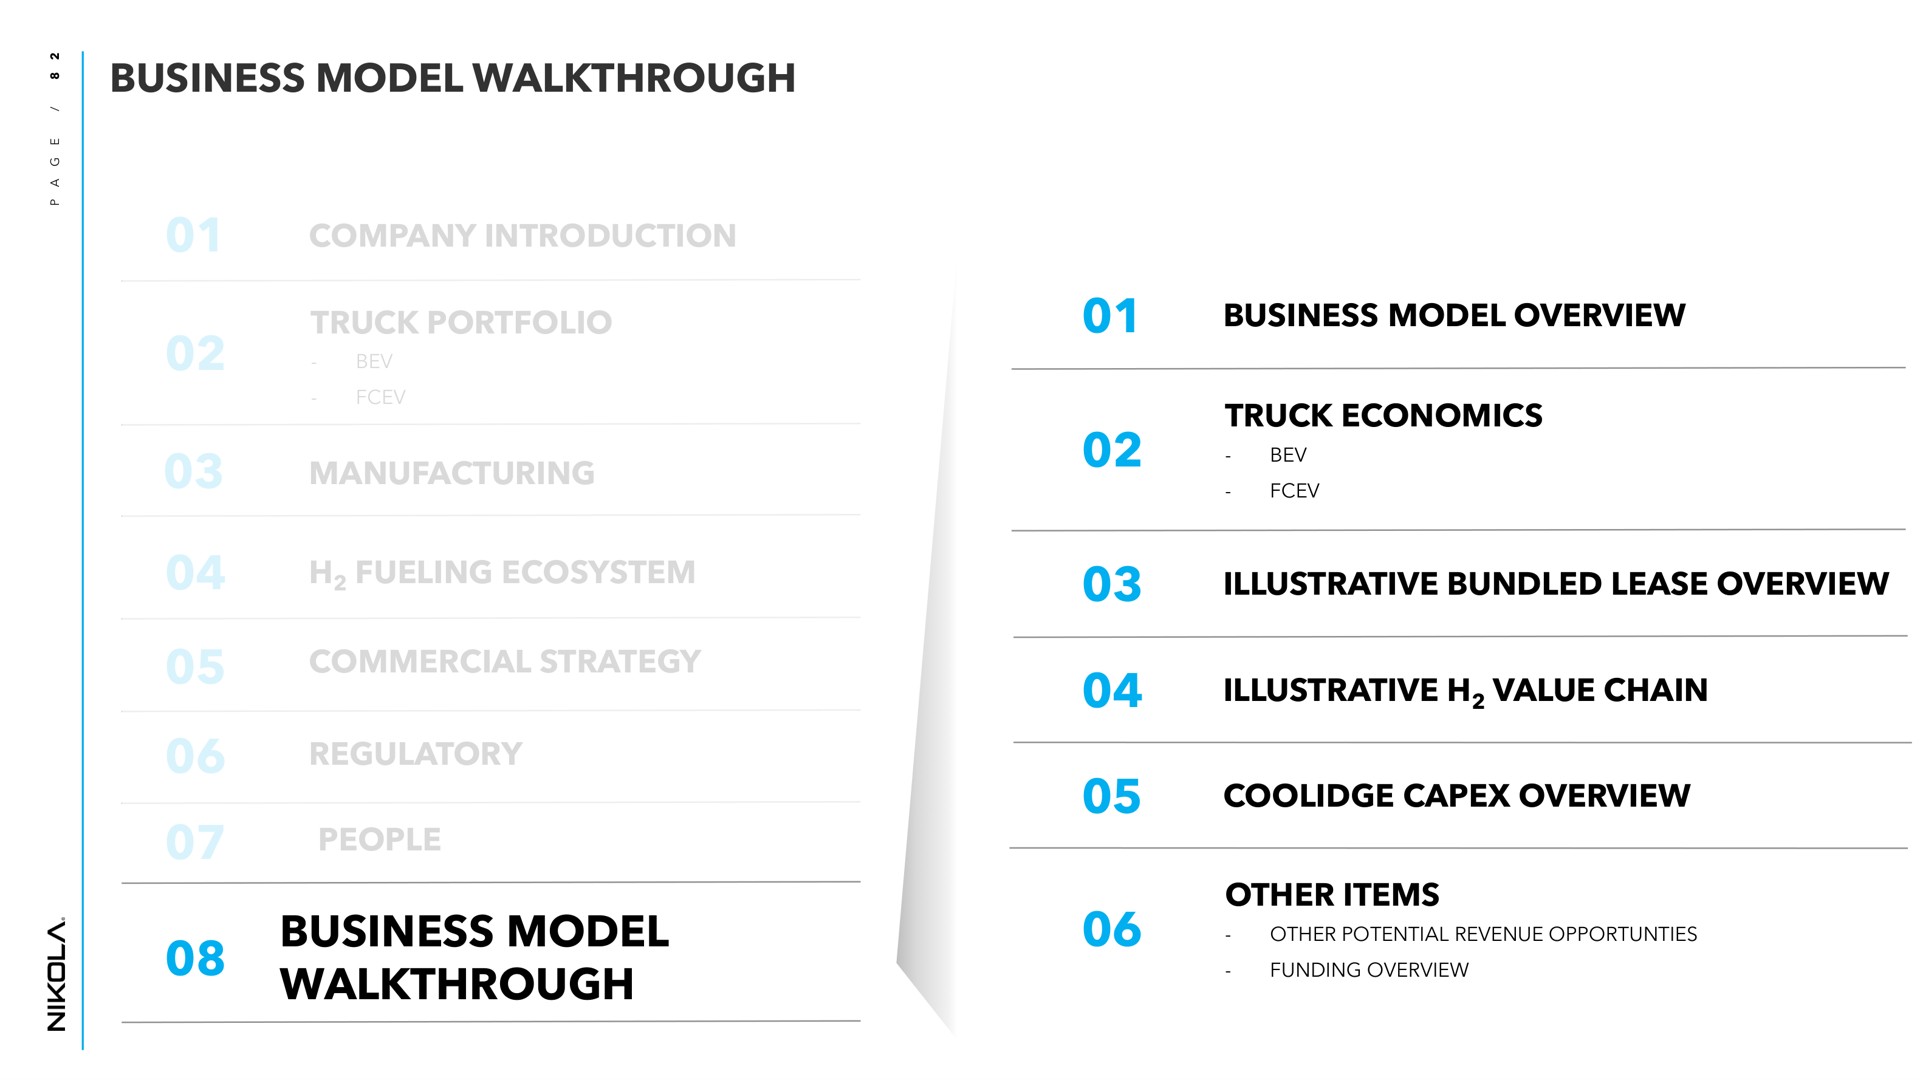 business model company introduction truck portfolio manufacturing fueling ecosystem commercial strategy regulatory people business model business model overview truck economics illustrative bundled lease overview illustrative value chain overview other items | Nikola